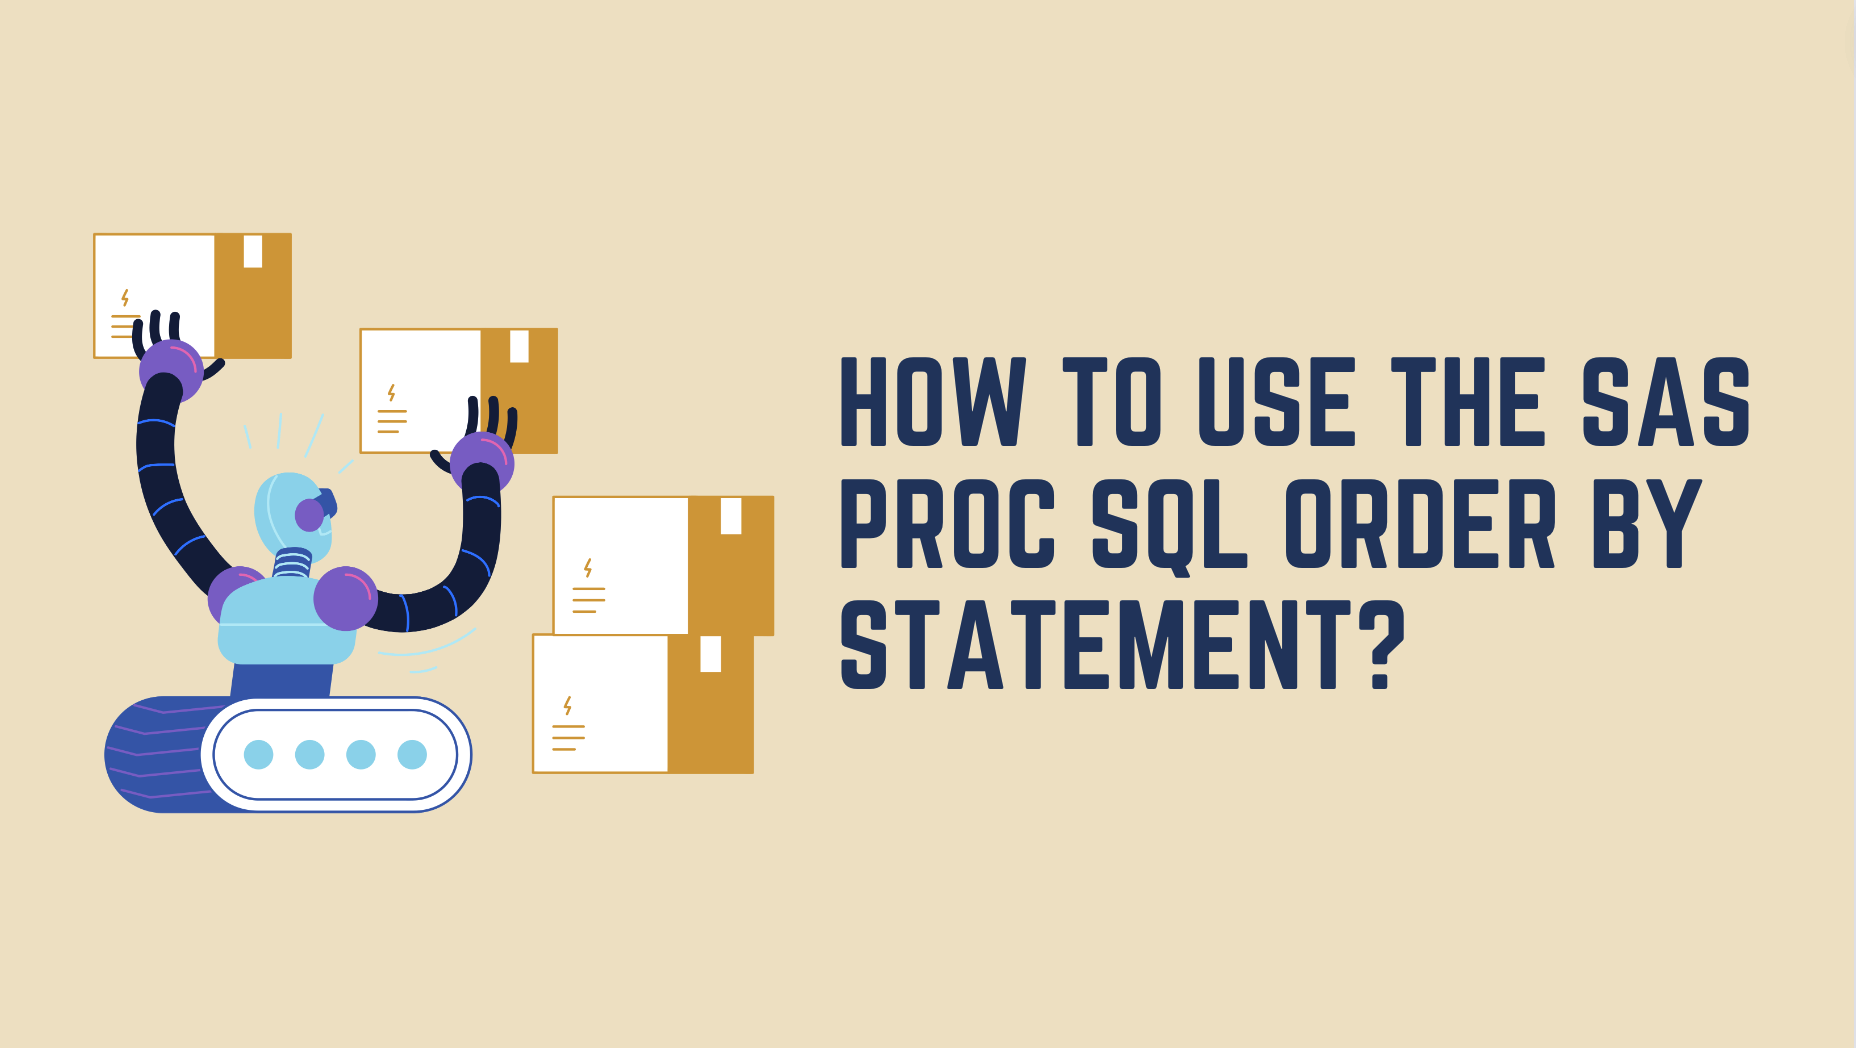 How To Use The SAS Proc SQL Order By Statement?